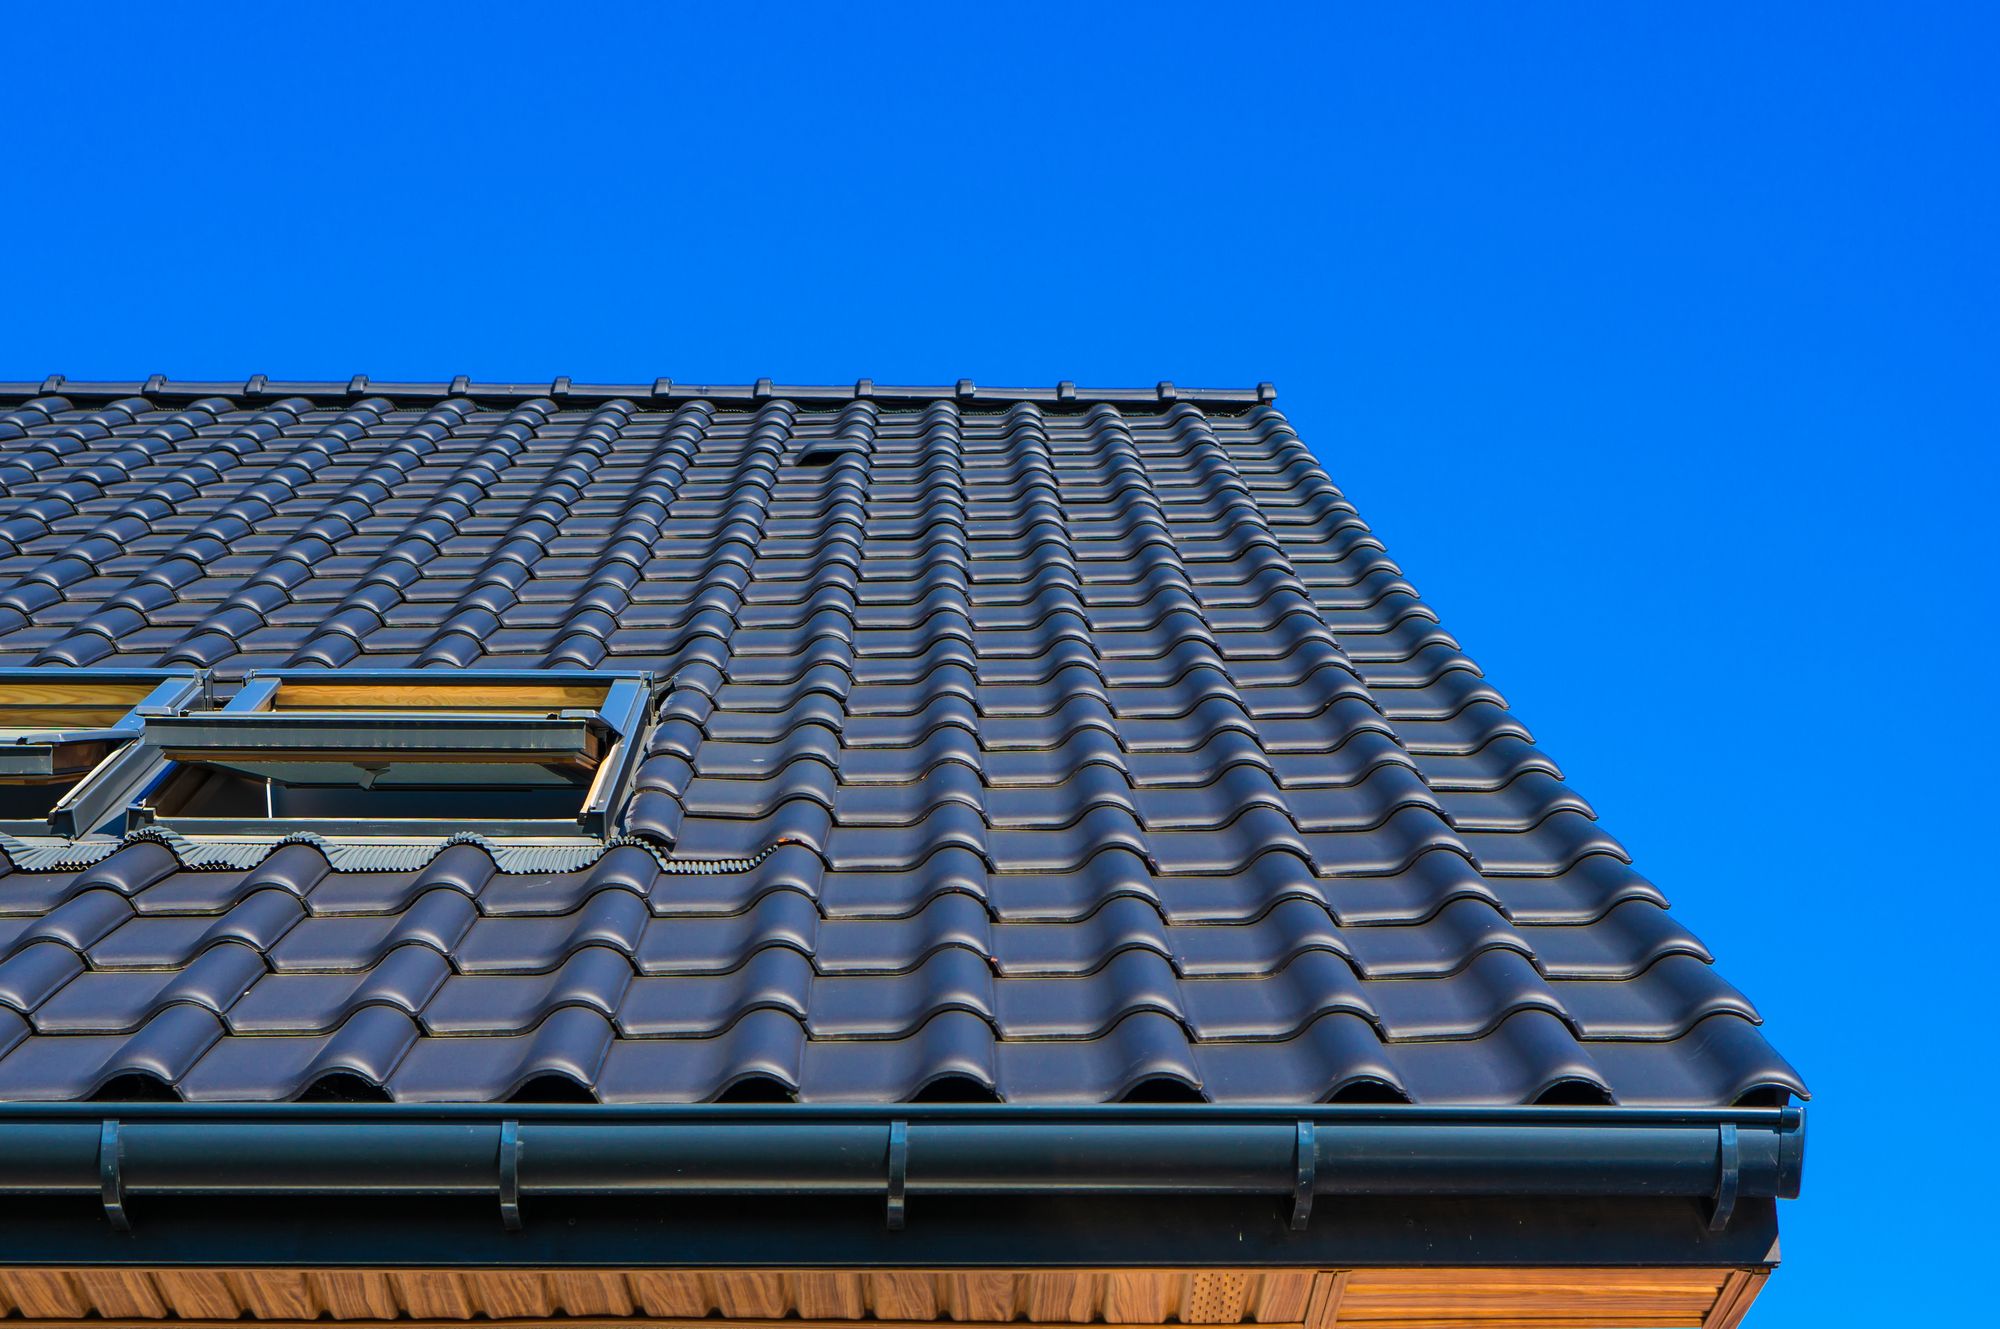 Slate Roofing pros, cons and estimated costs